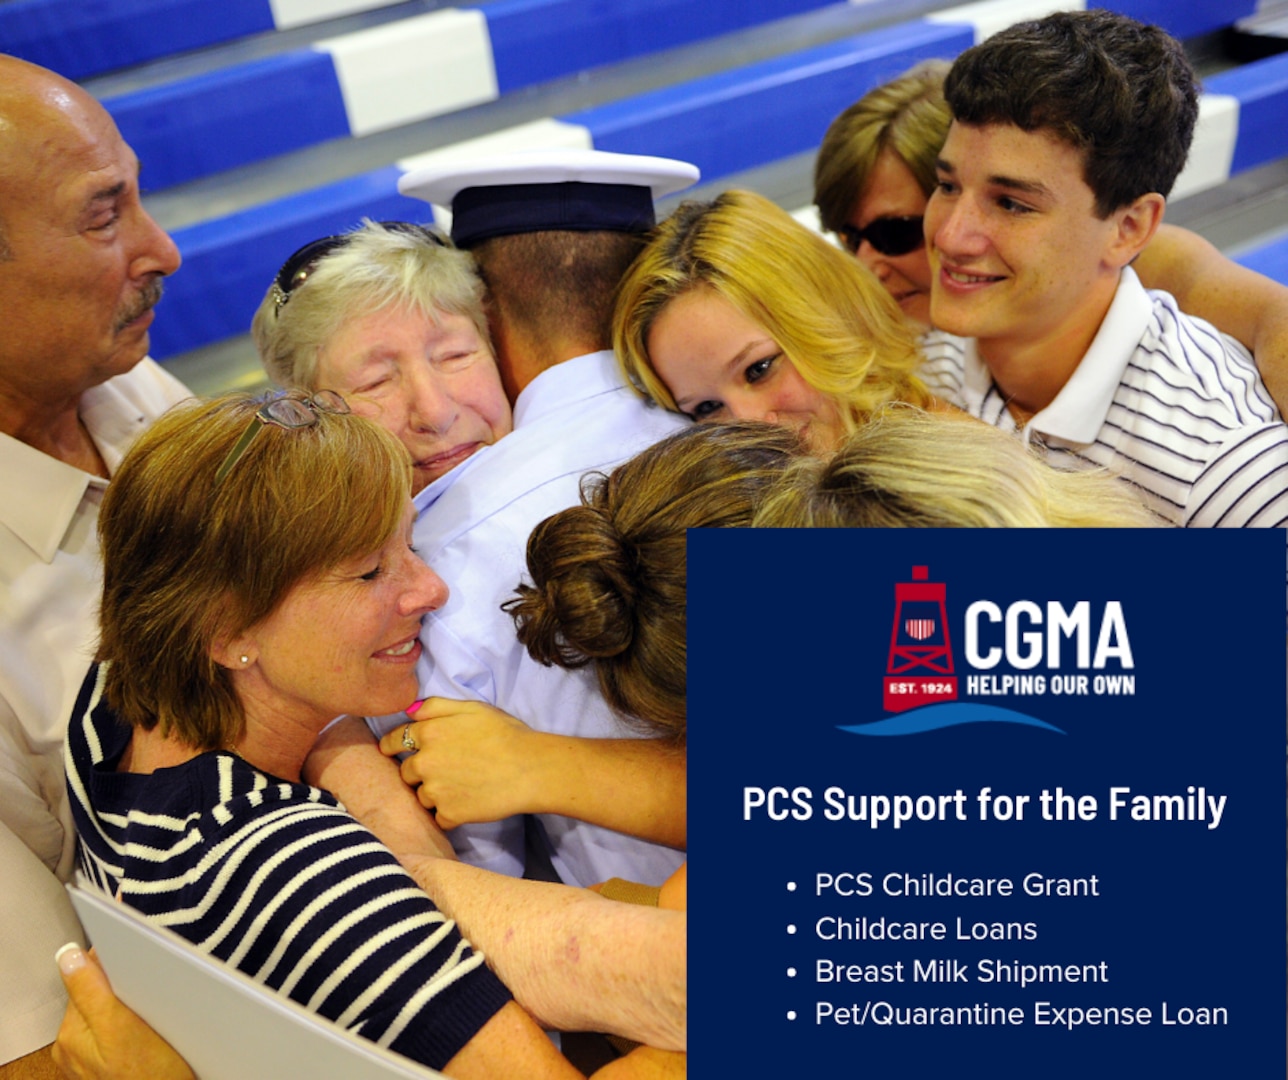 A Coast Guard family reuniting with their loved one and demonstrating how CGMA's financial support can assist more Coast Guard families in these touching moments. (This photo is courtesy of CGMA)